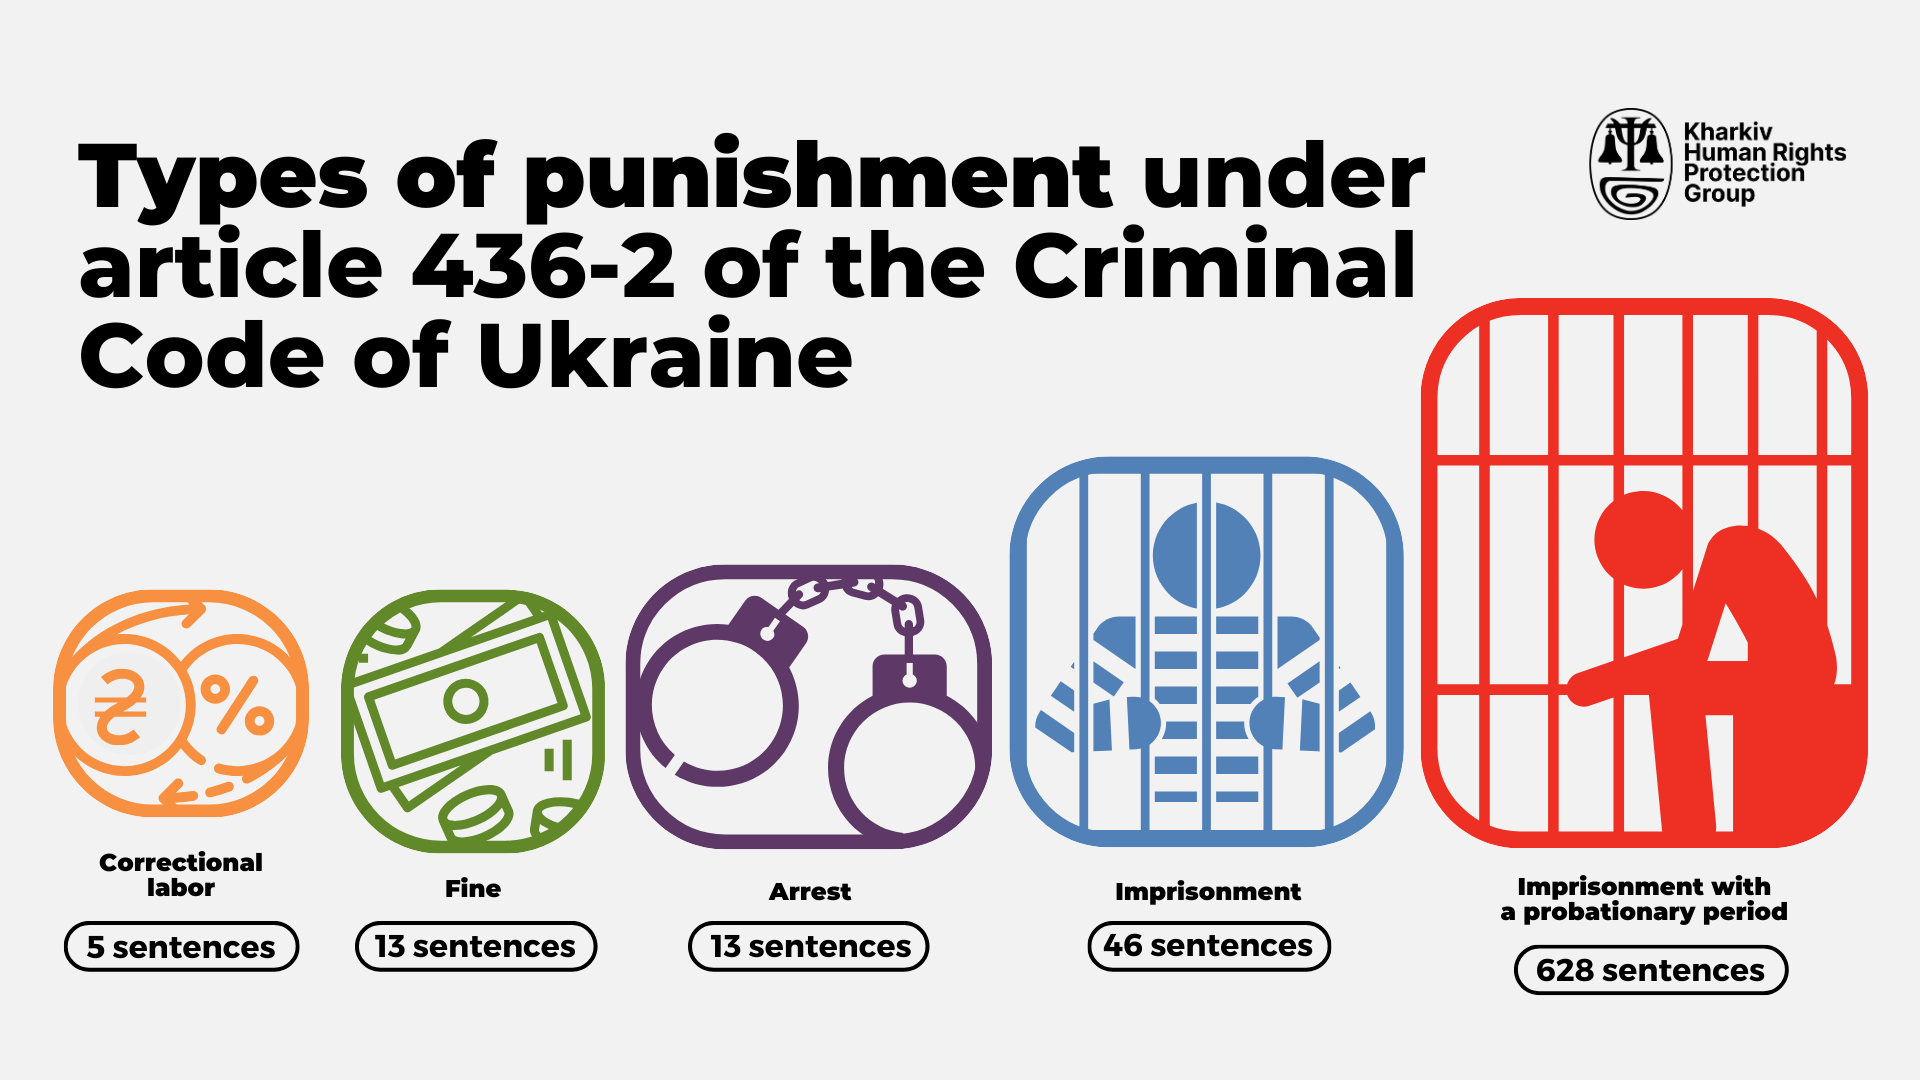 Criminal cases on justification of aggression almost always result in a custodial sentence, but only a minority of convicted persons actually end up behind bars. Illustration: Mariia Krykunenko / Kharkiv Human Rights Protection Group